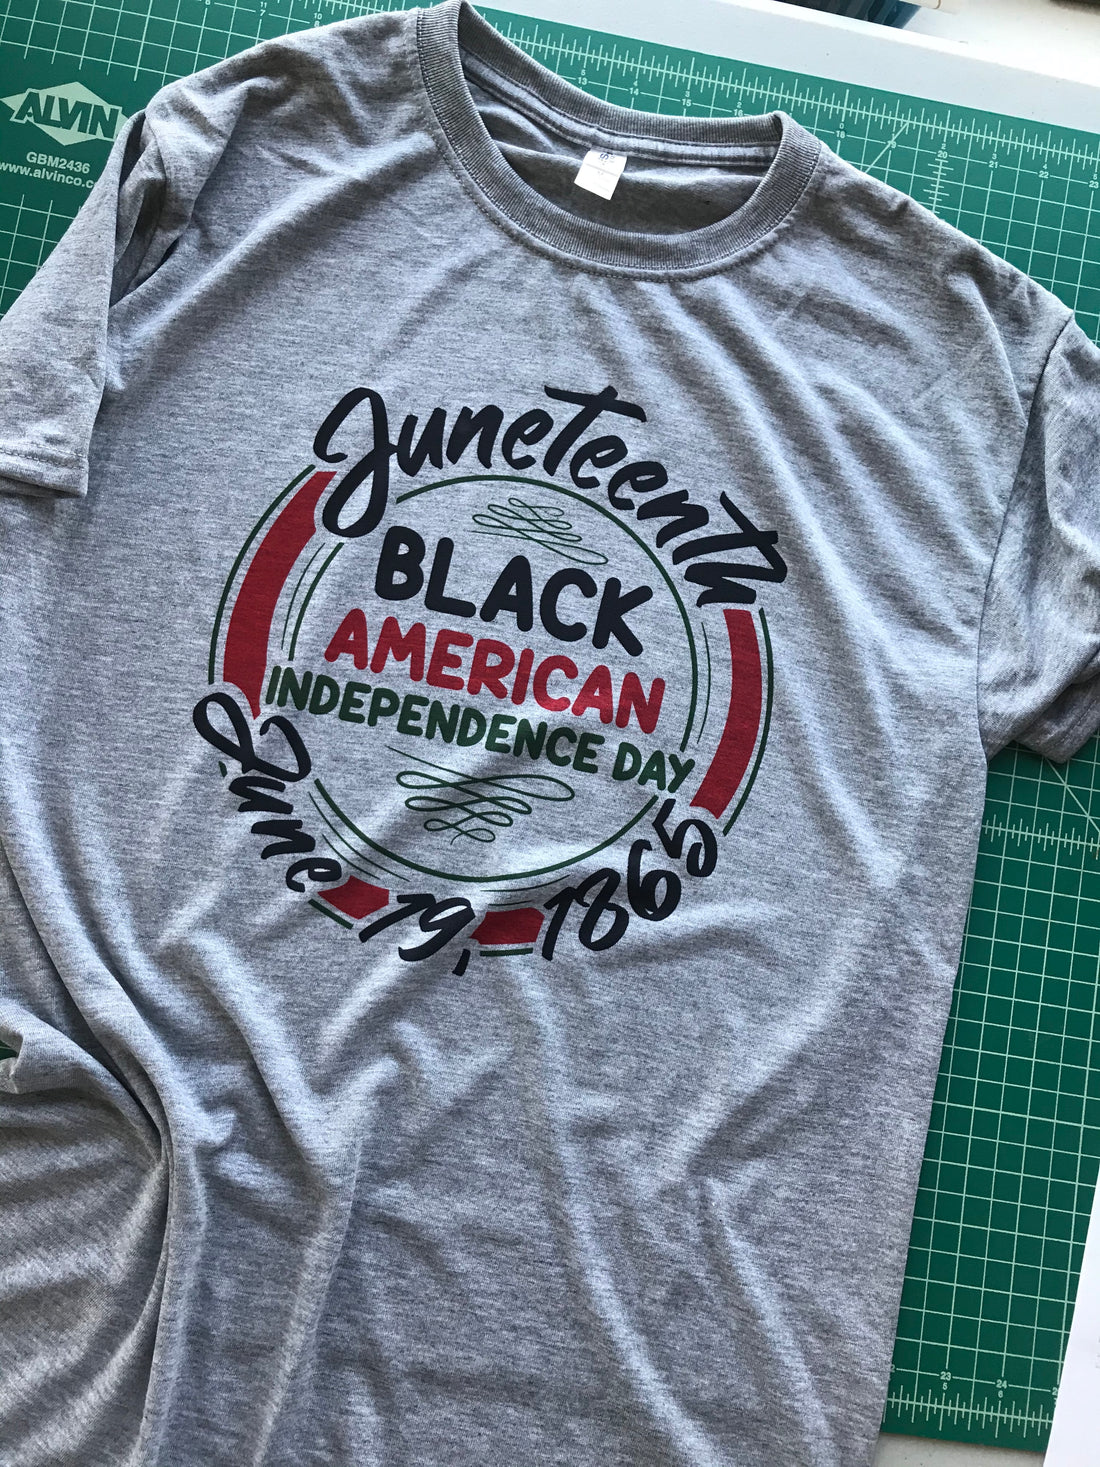 Juneteenth-black-american-independence-day-tee-shirt-grey-3-fab five print shop